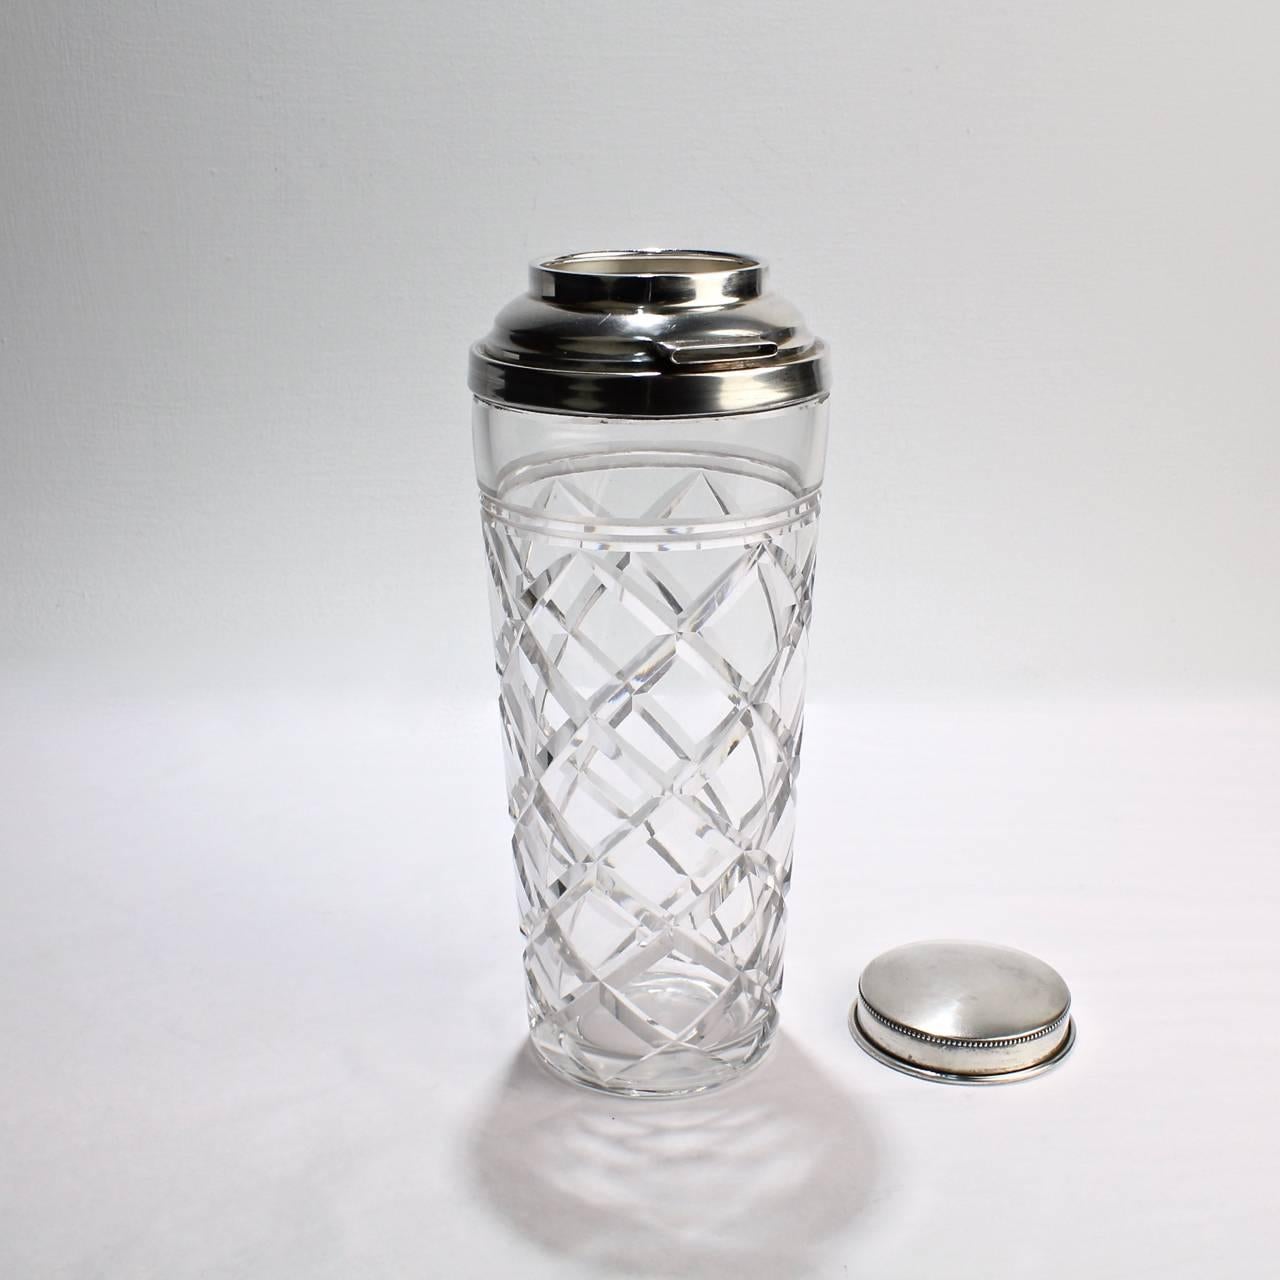 20th Century American Art Deco Cut-Glass and Sterling Silver Cocktail Shaker by Webster & Co